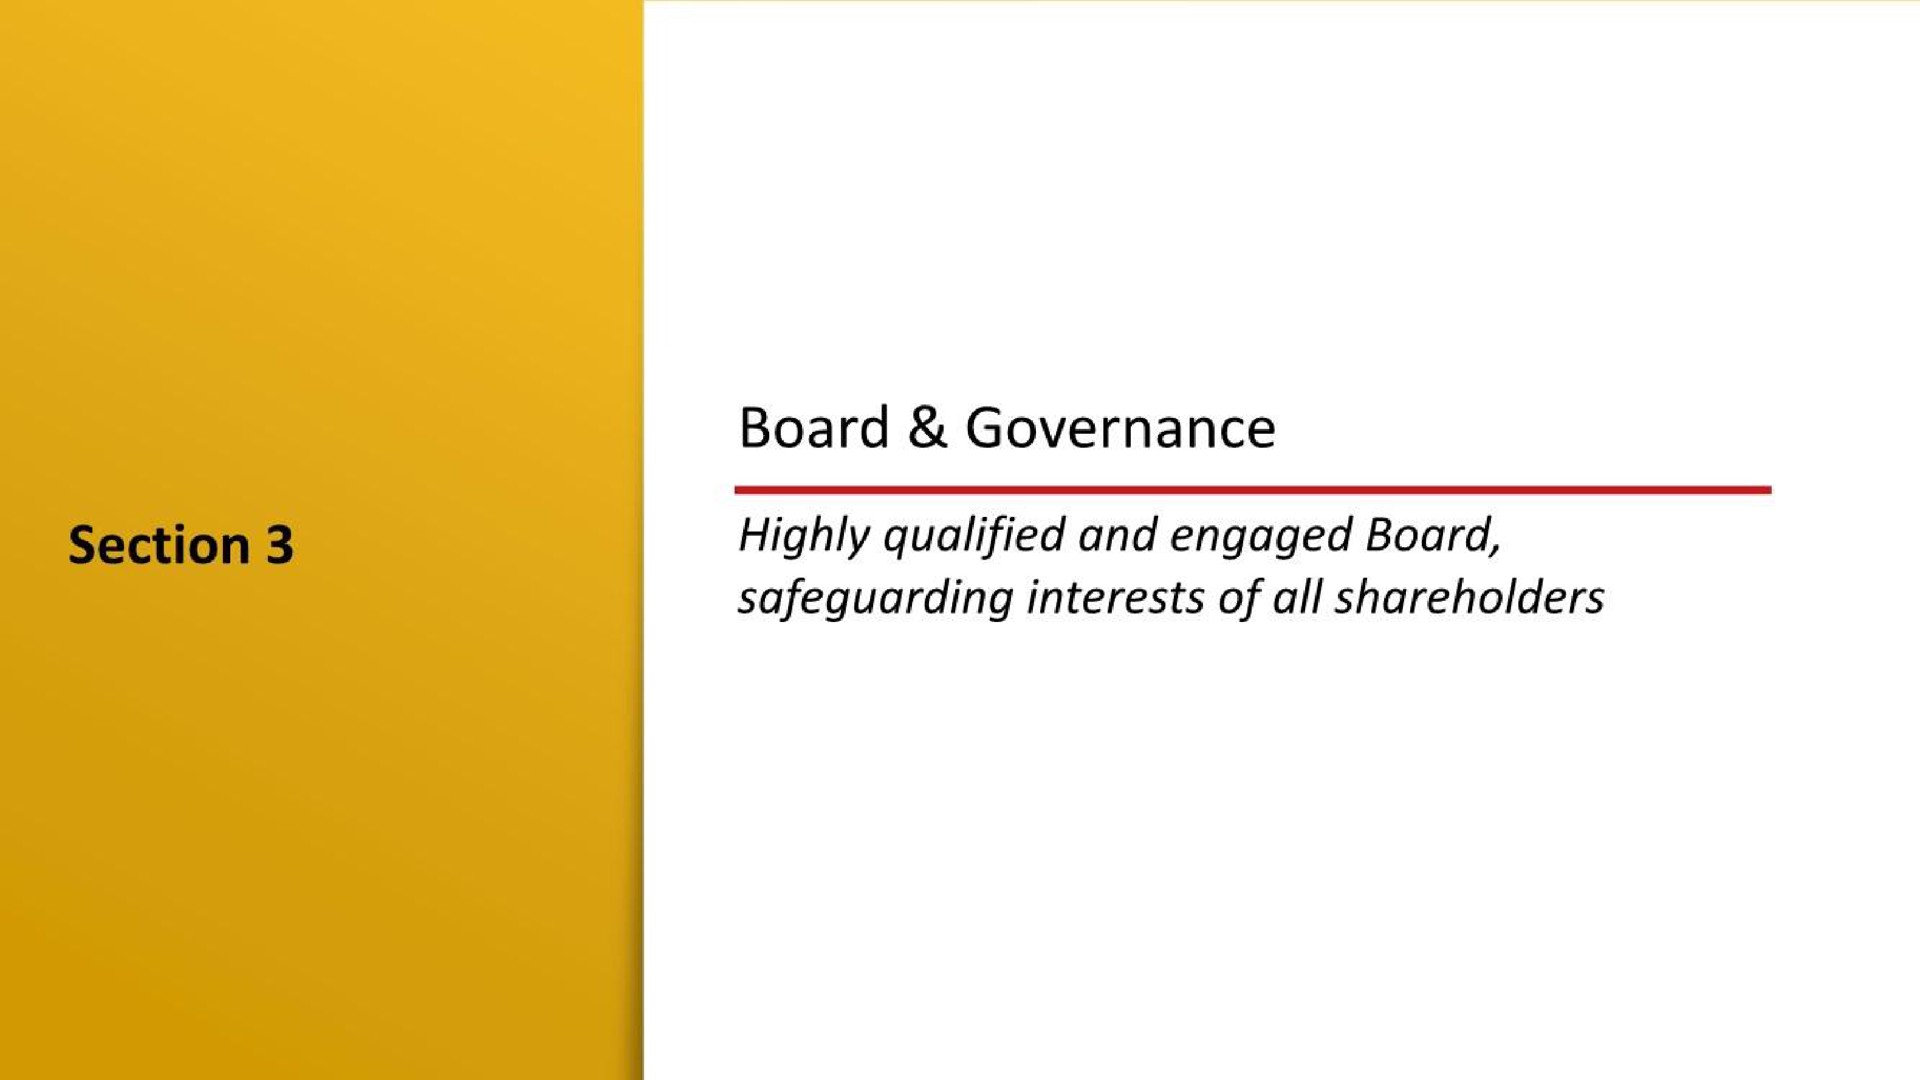 board governance highly qualified and engaged board safeguarding interests of all shareholders | McDonald's